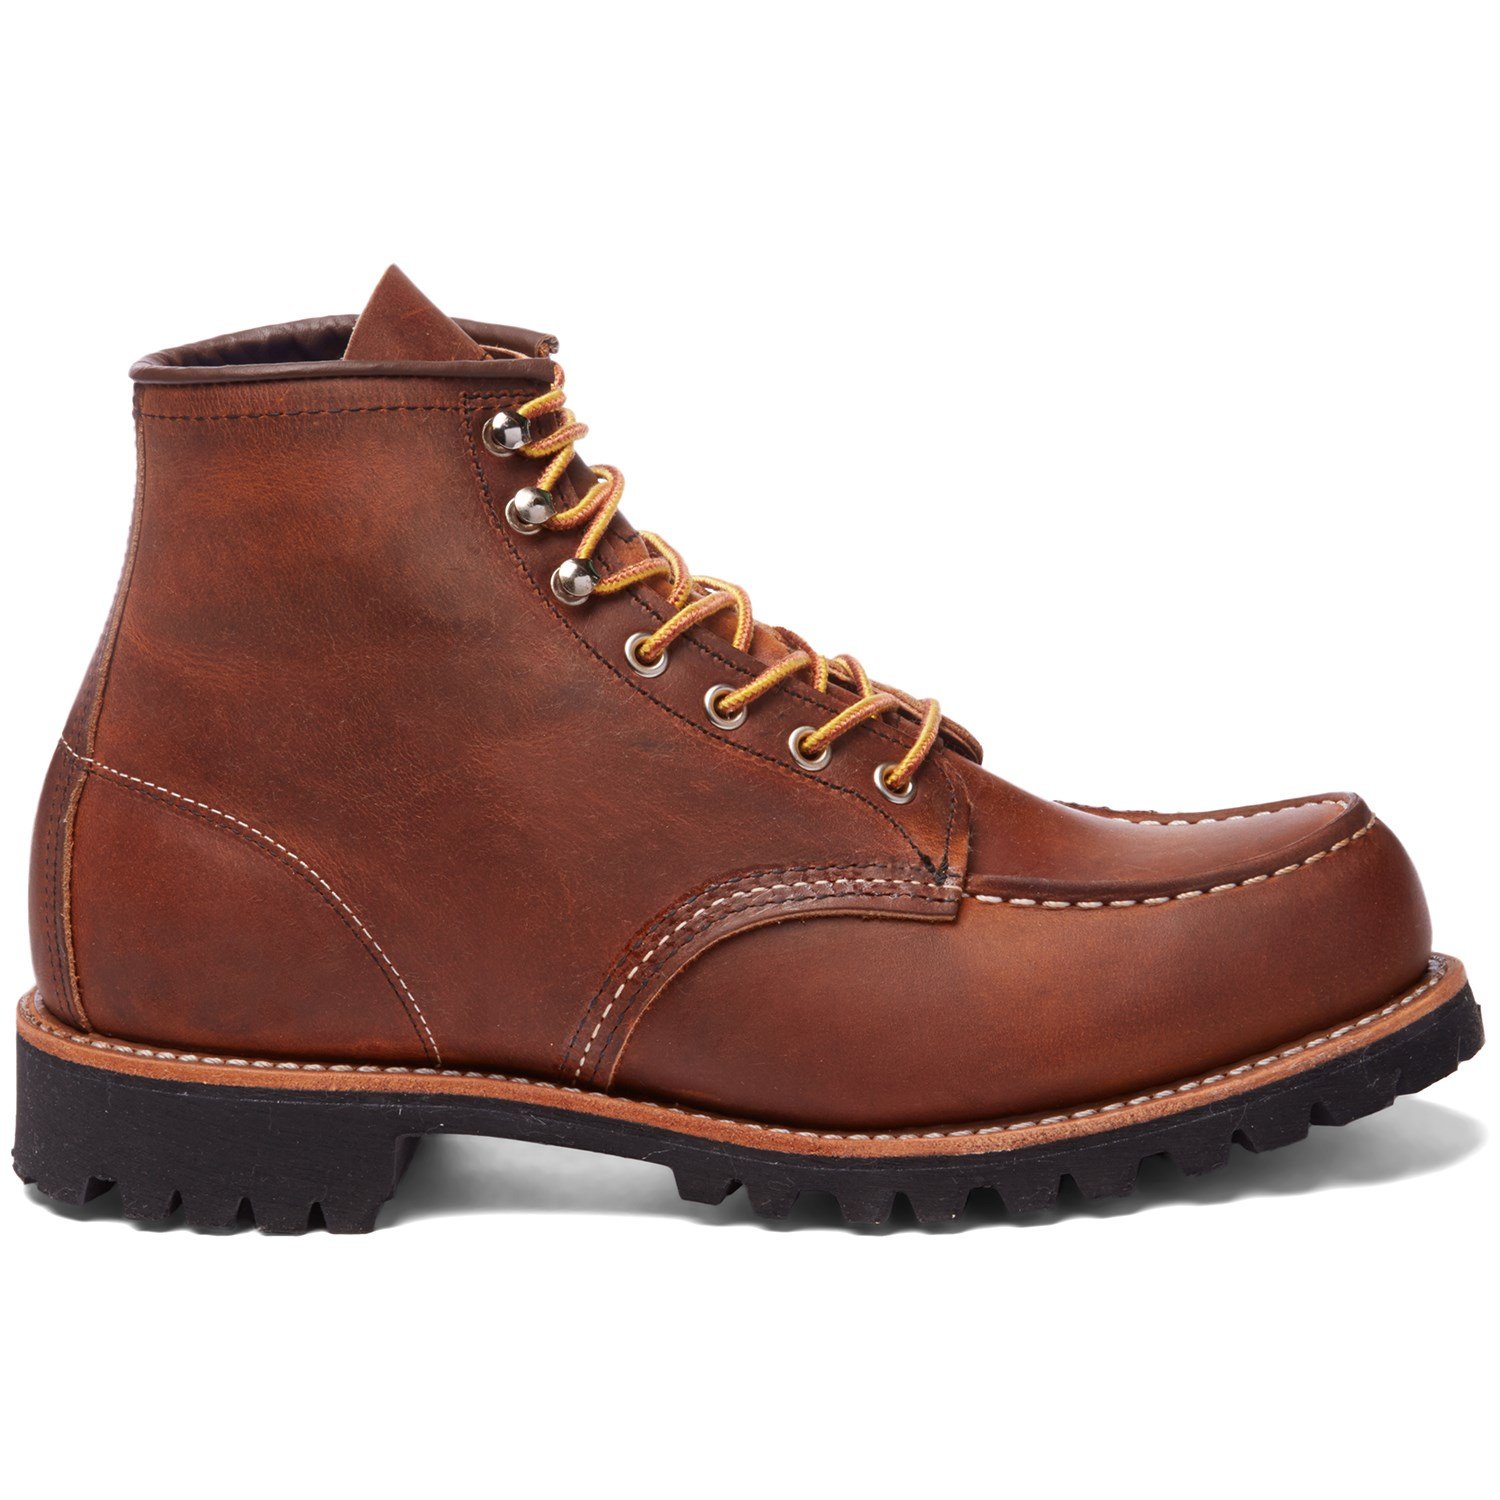 Red Wing Boot Stores Near Me | Coltford Boots